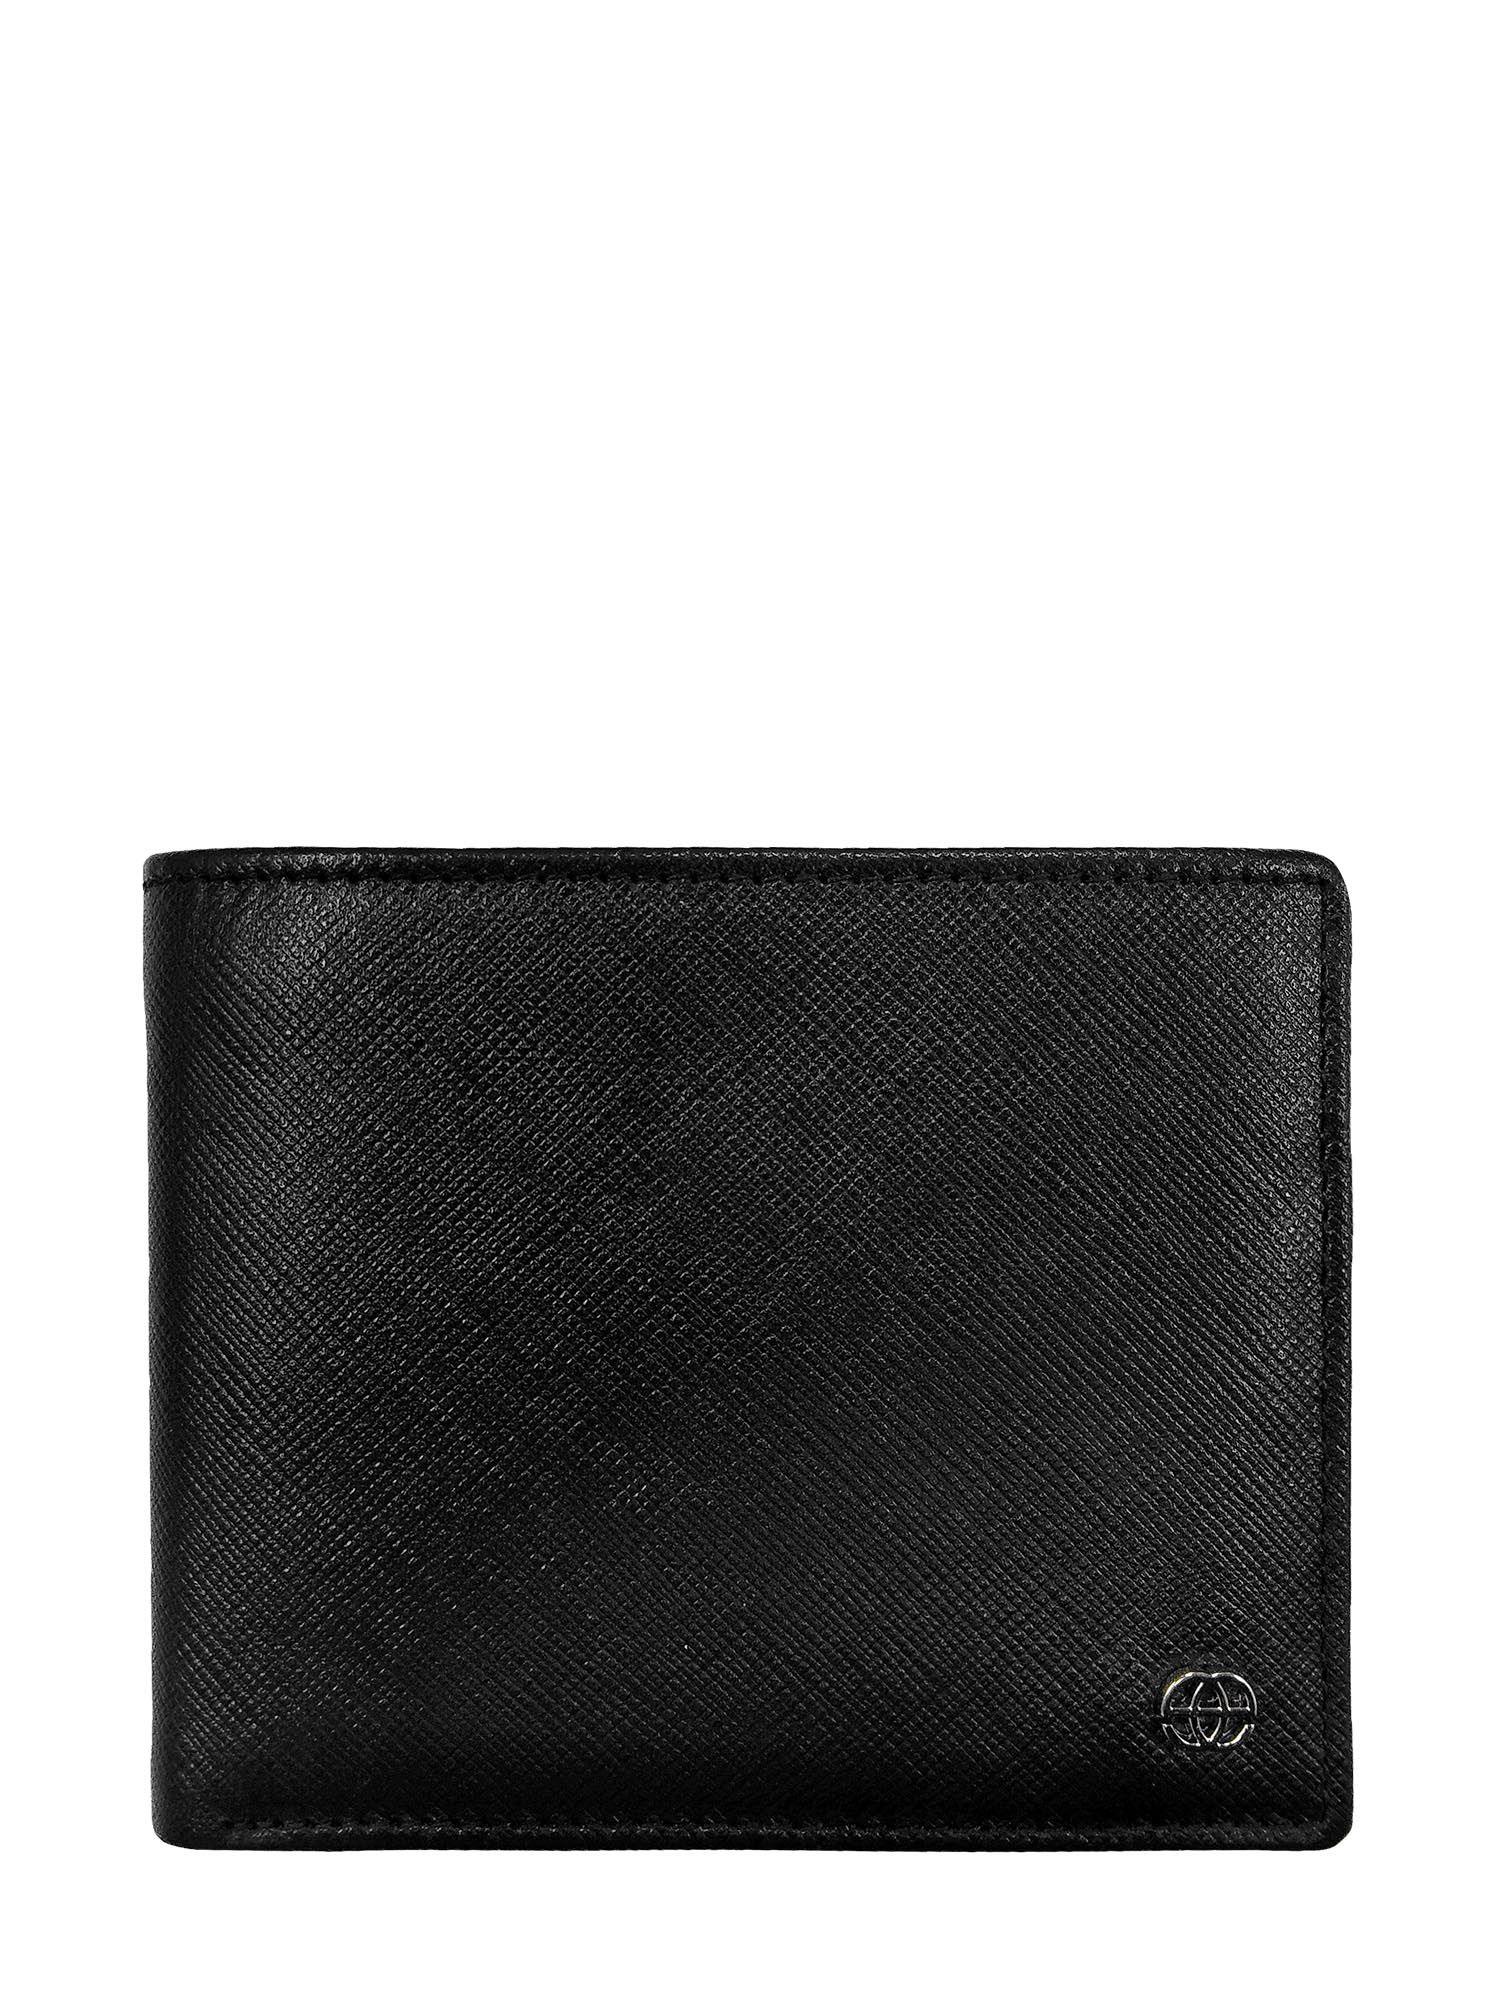 Eske Paris Sampson Leather Mens wallet,Black (Black) At Nykaa, Best Beauty Products Online